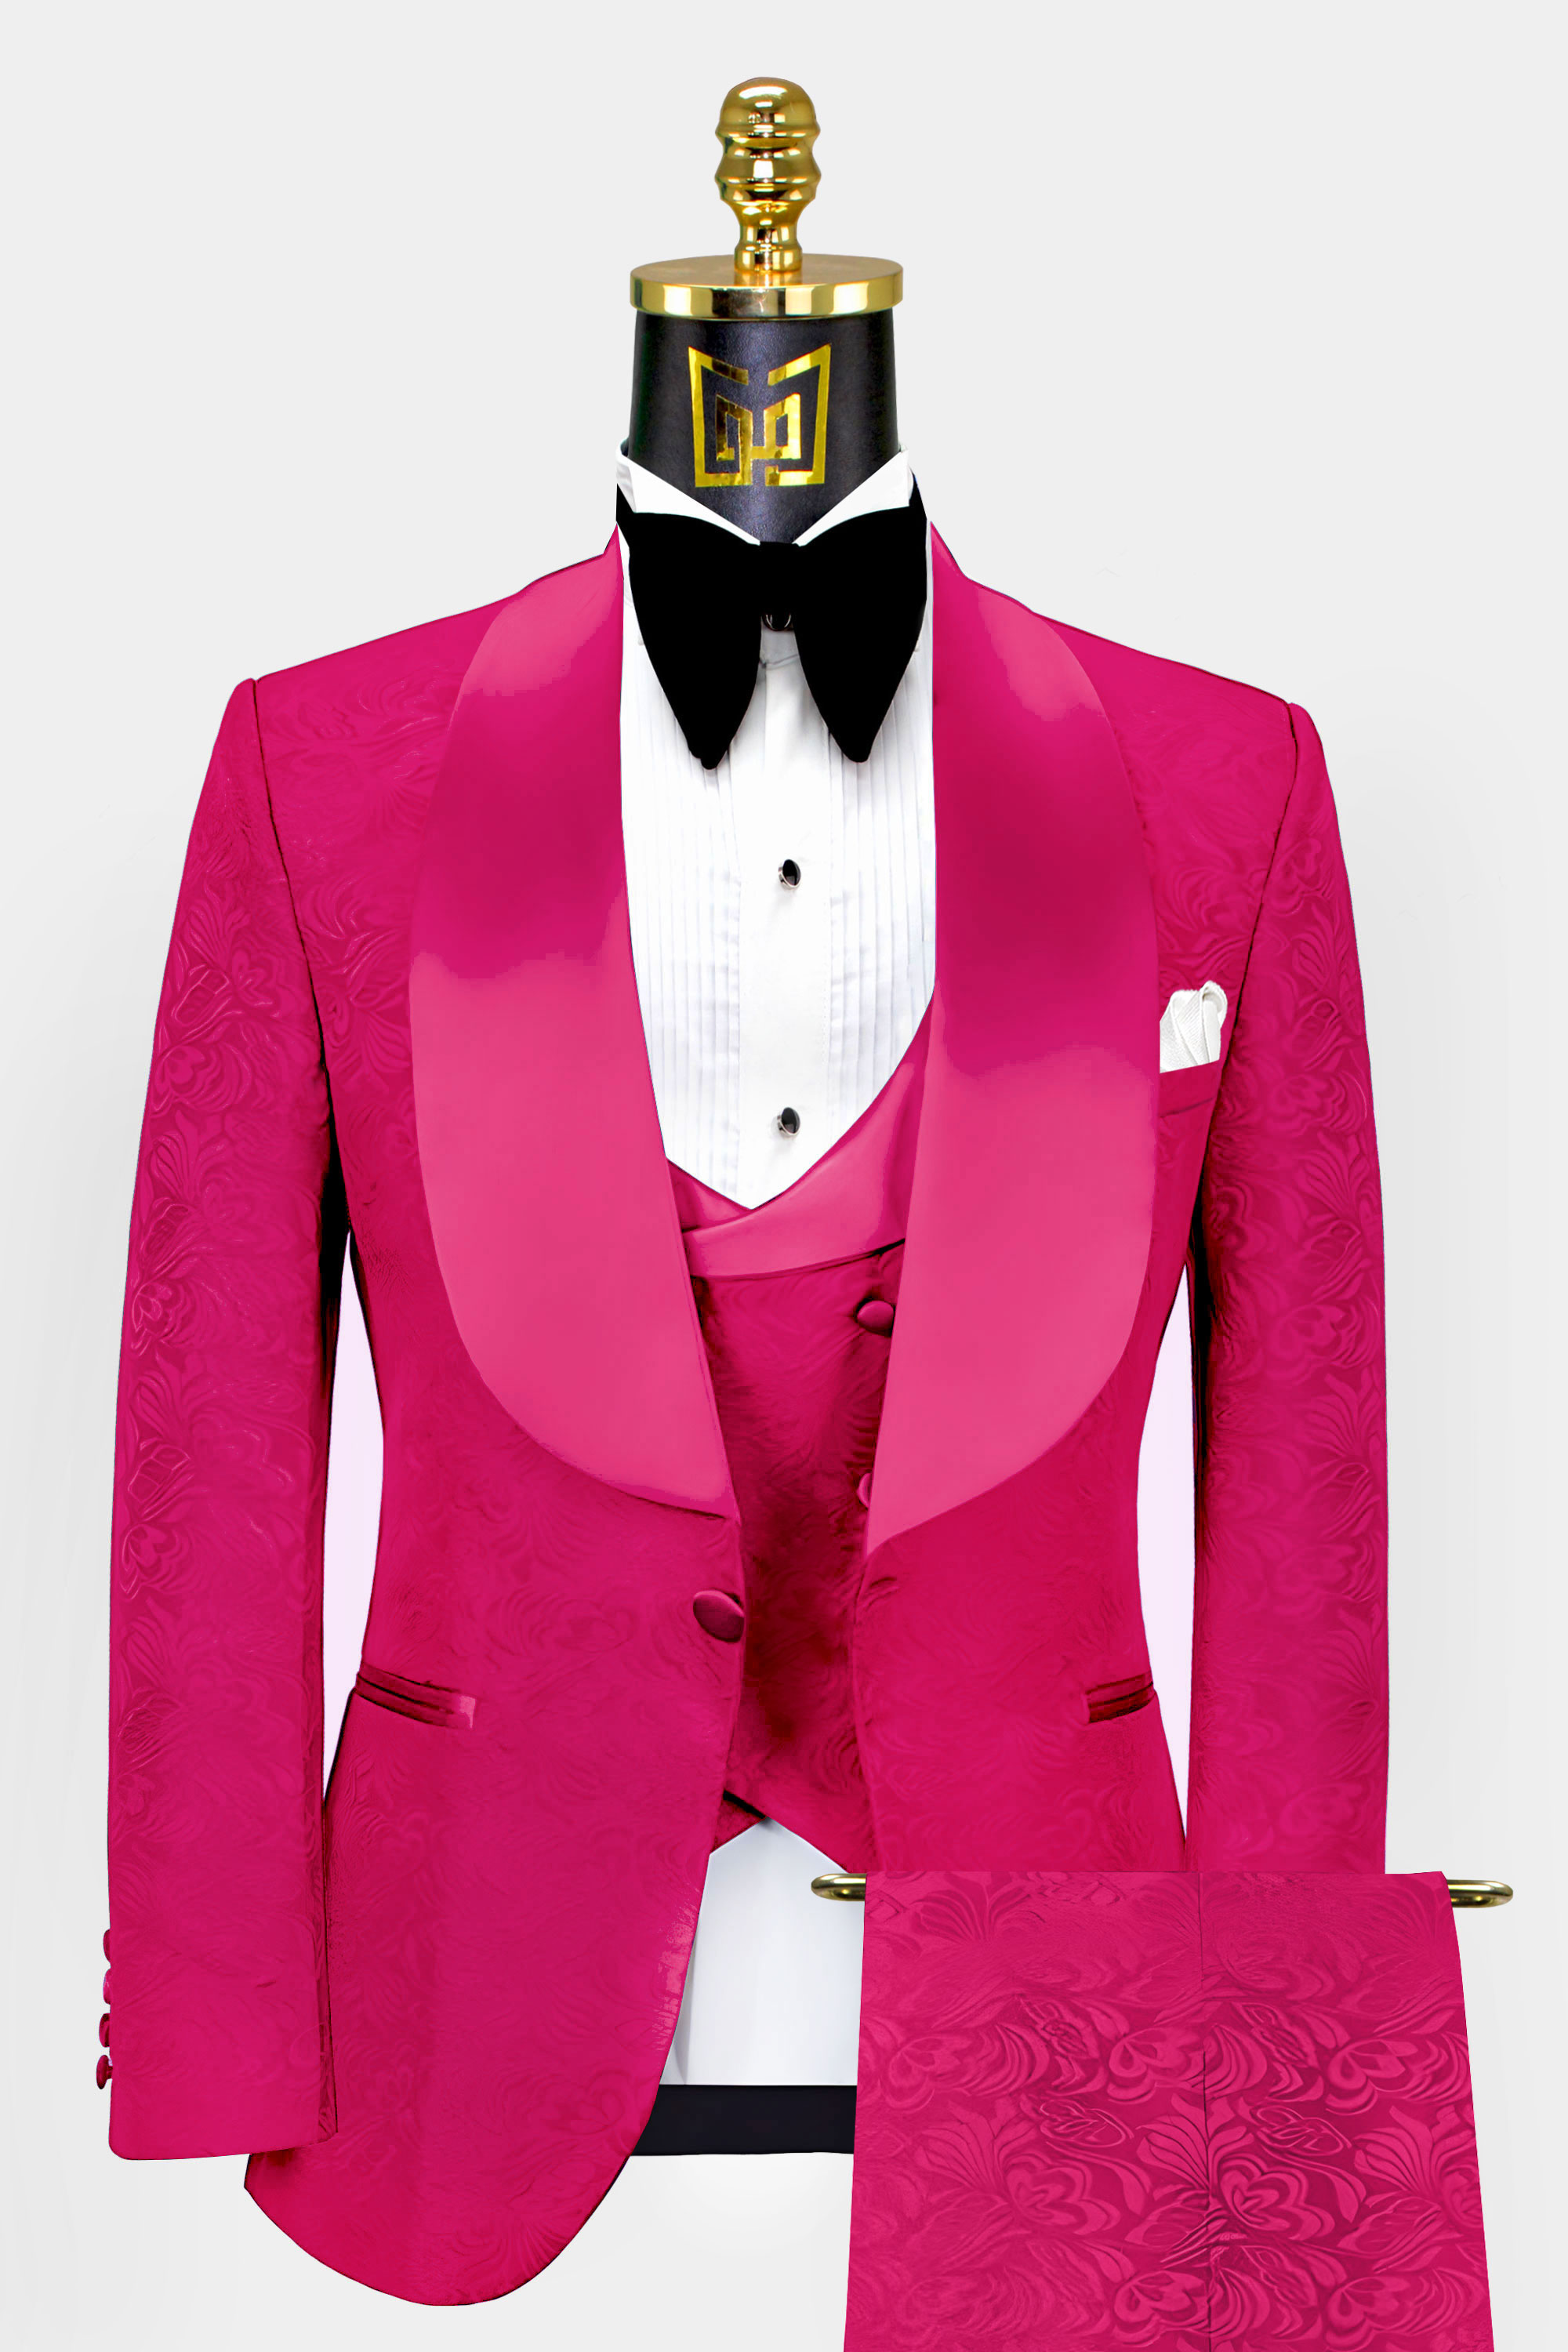 Gentlemens Collection Mens Tuxedo Shirts Poly/Cotton Free Bow Tie On Selected Styles 